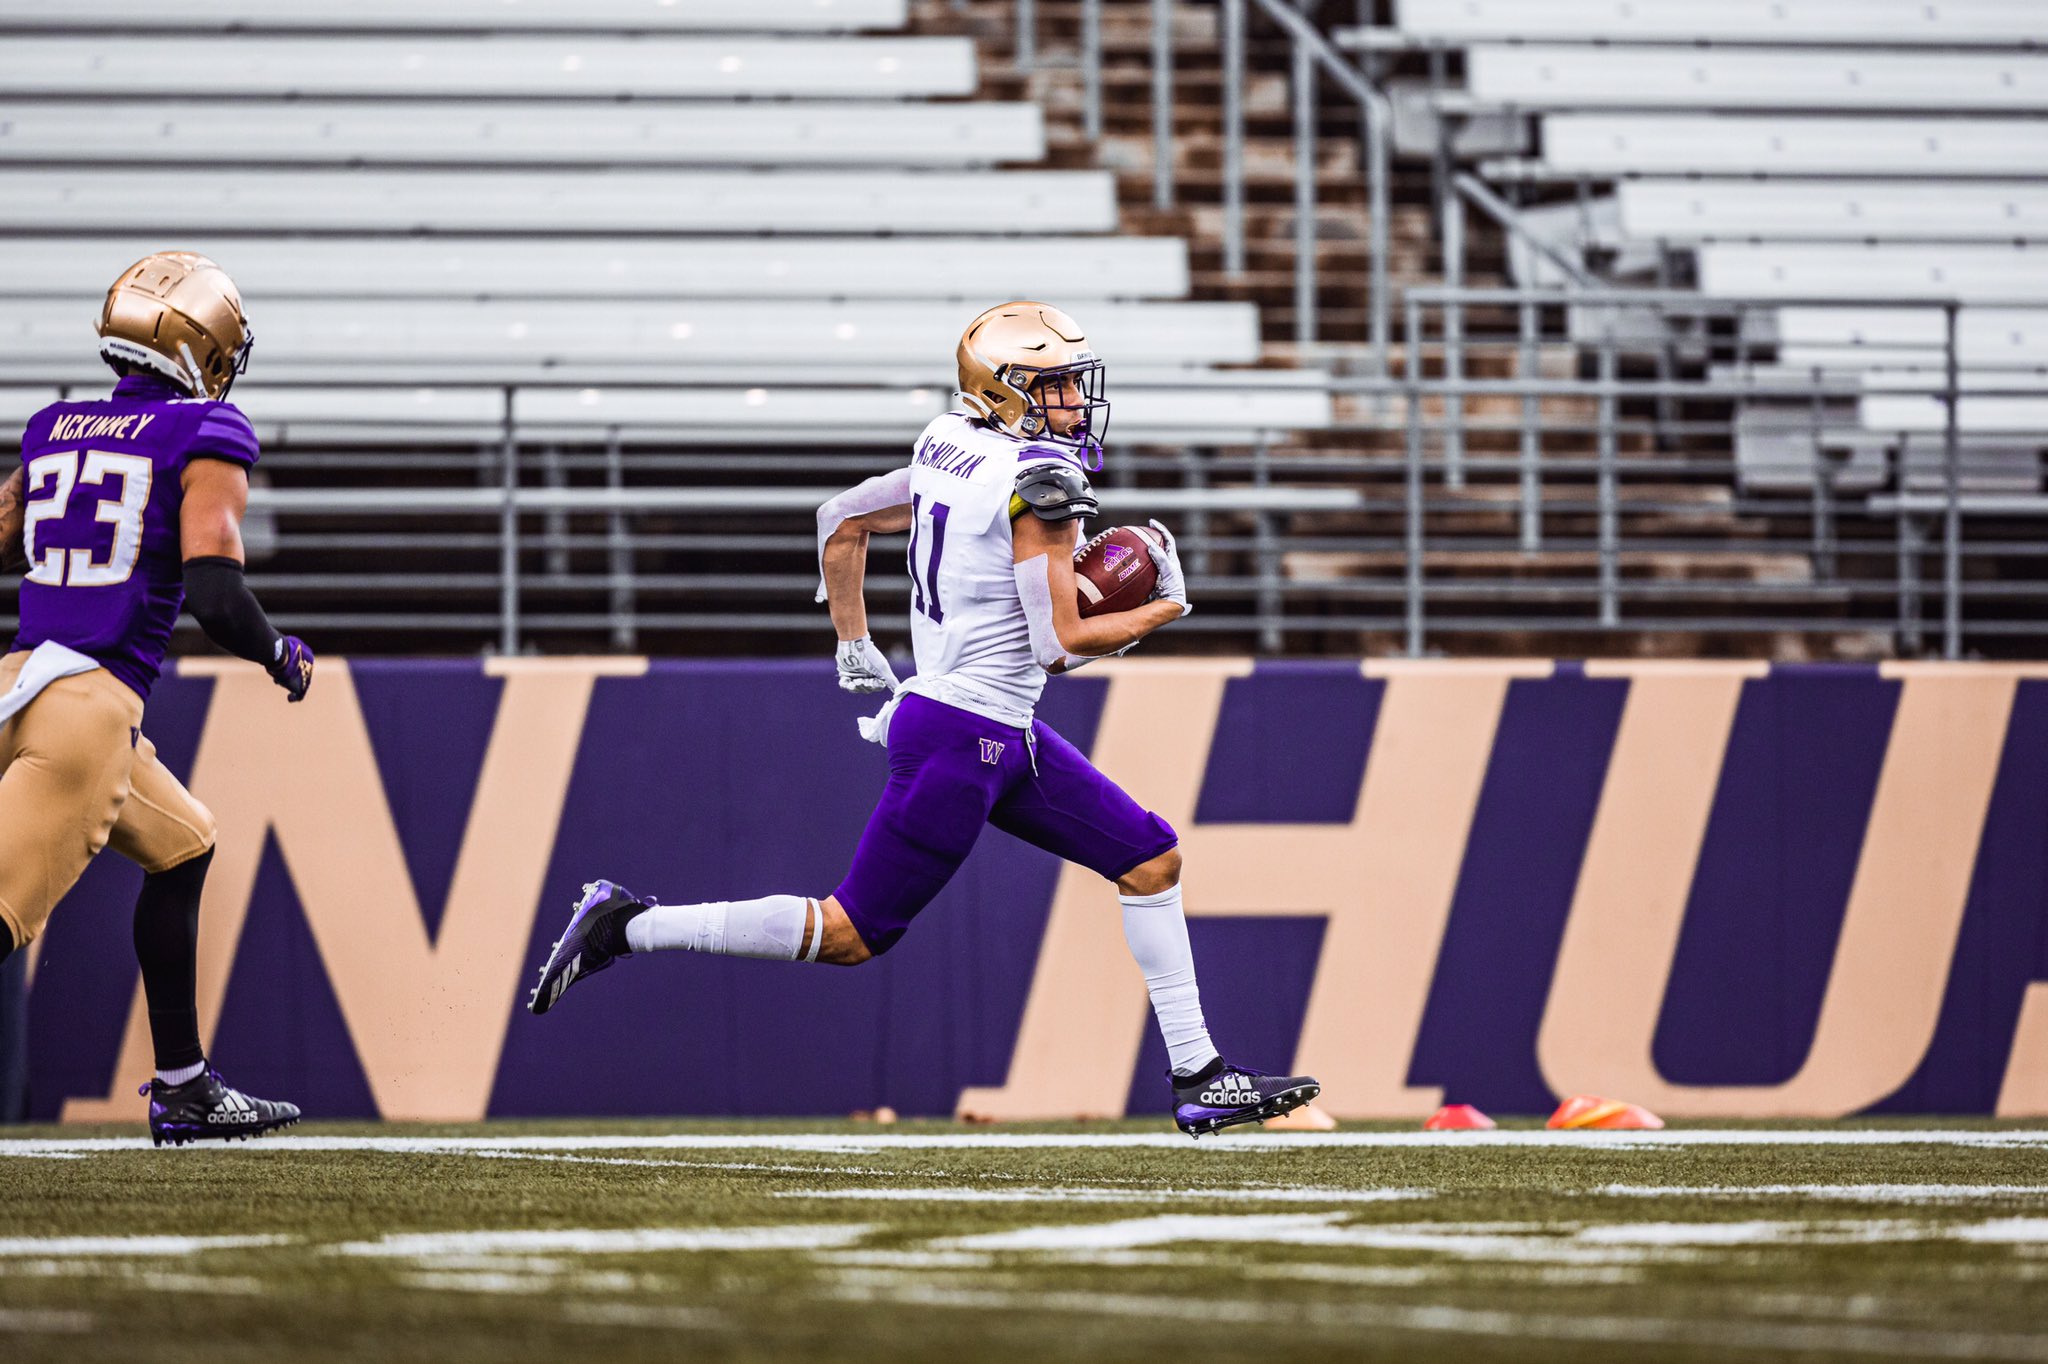 What We Found After Examining the UW Quarterbacks' Videotapes